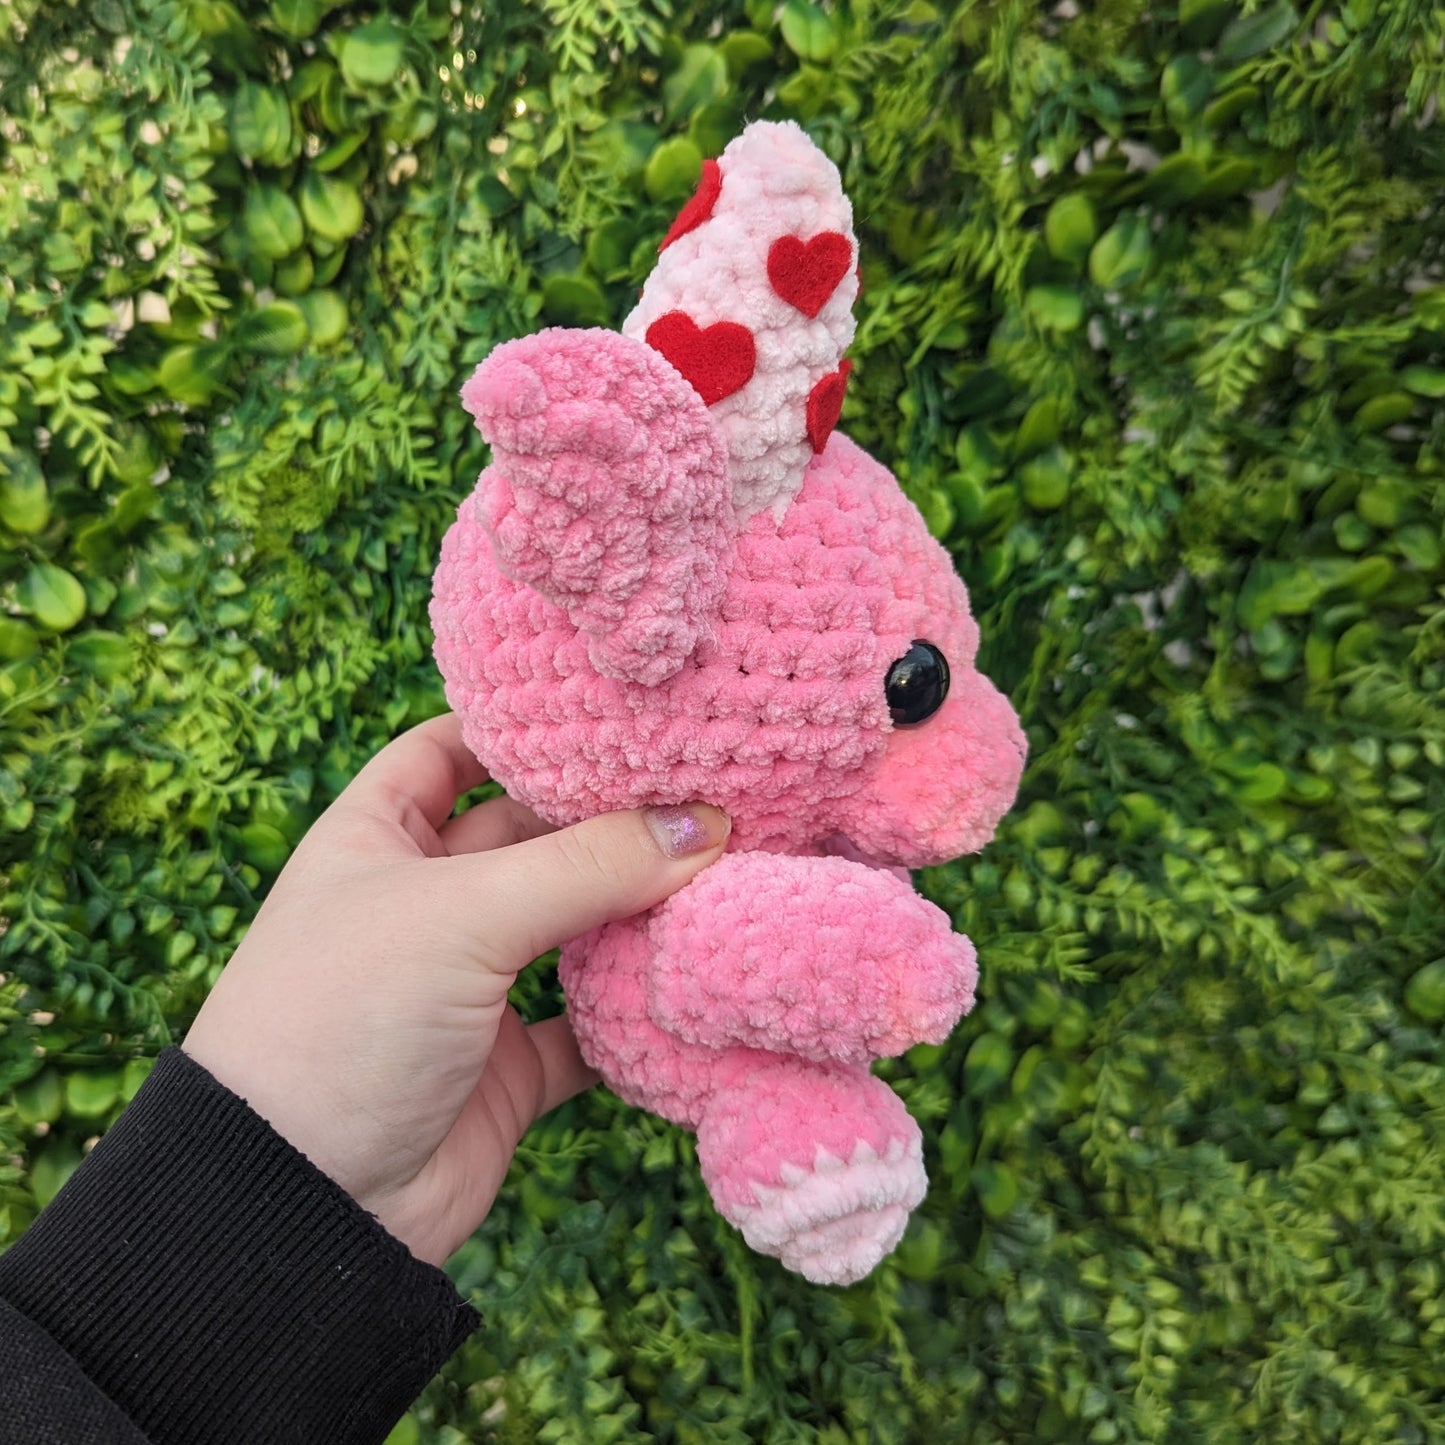 Baby Heart Baphomet Goat Crochet Plushie [Archived]